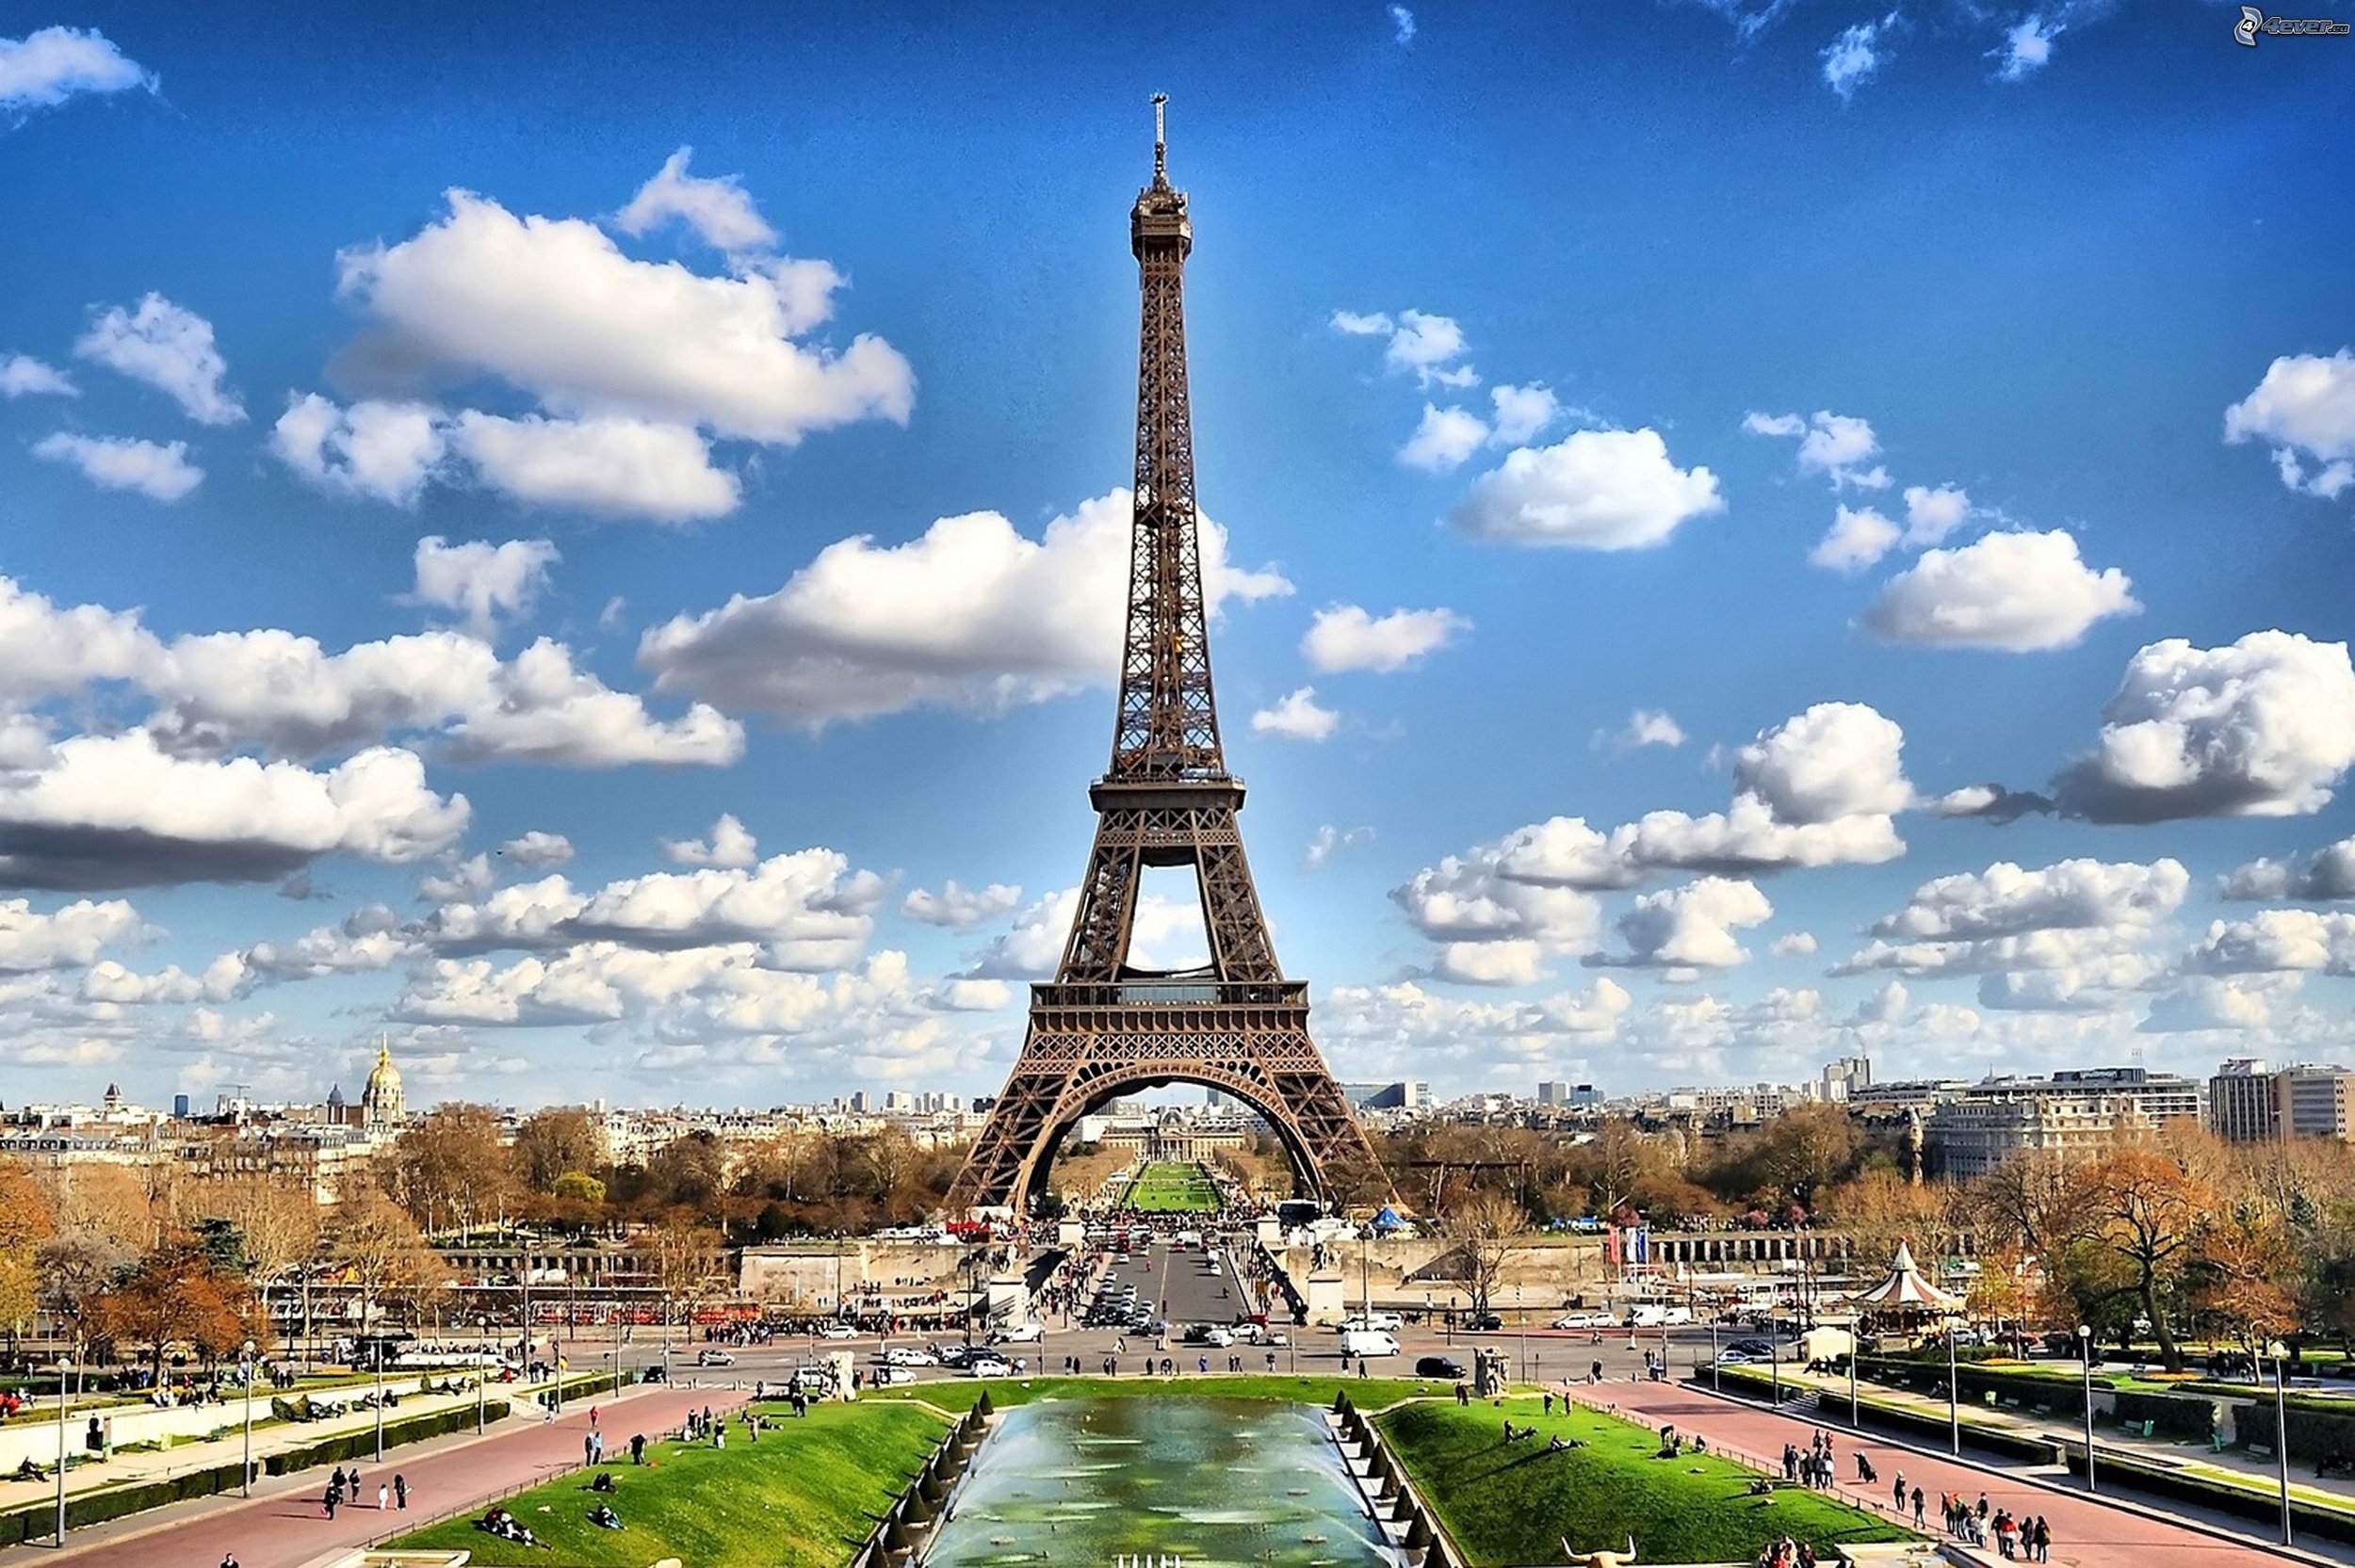 Eiffel Tower: A Symbol of Love and Architecture